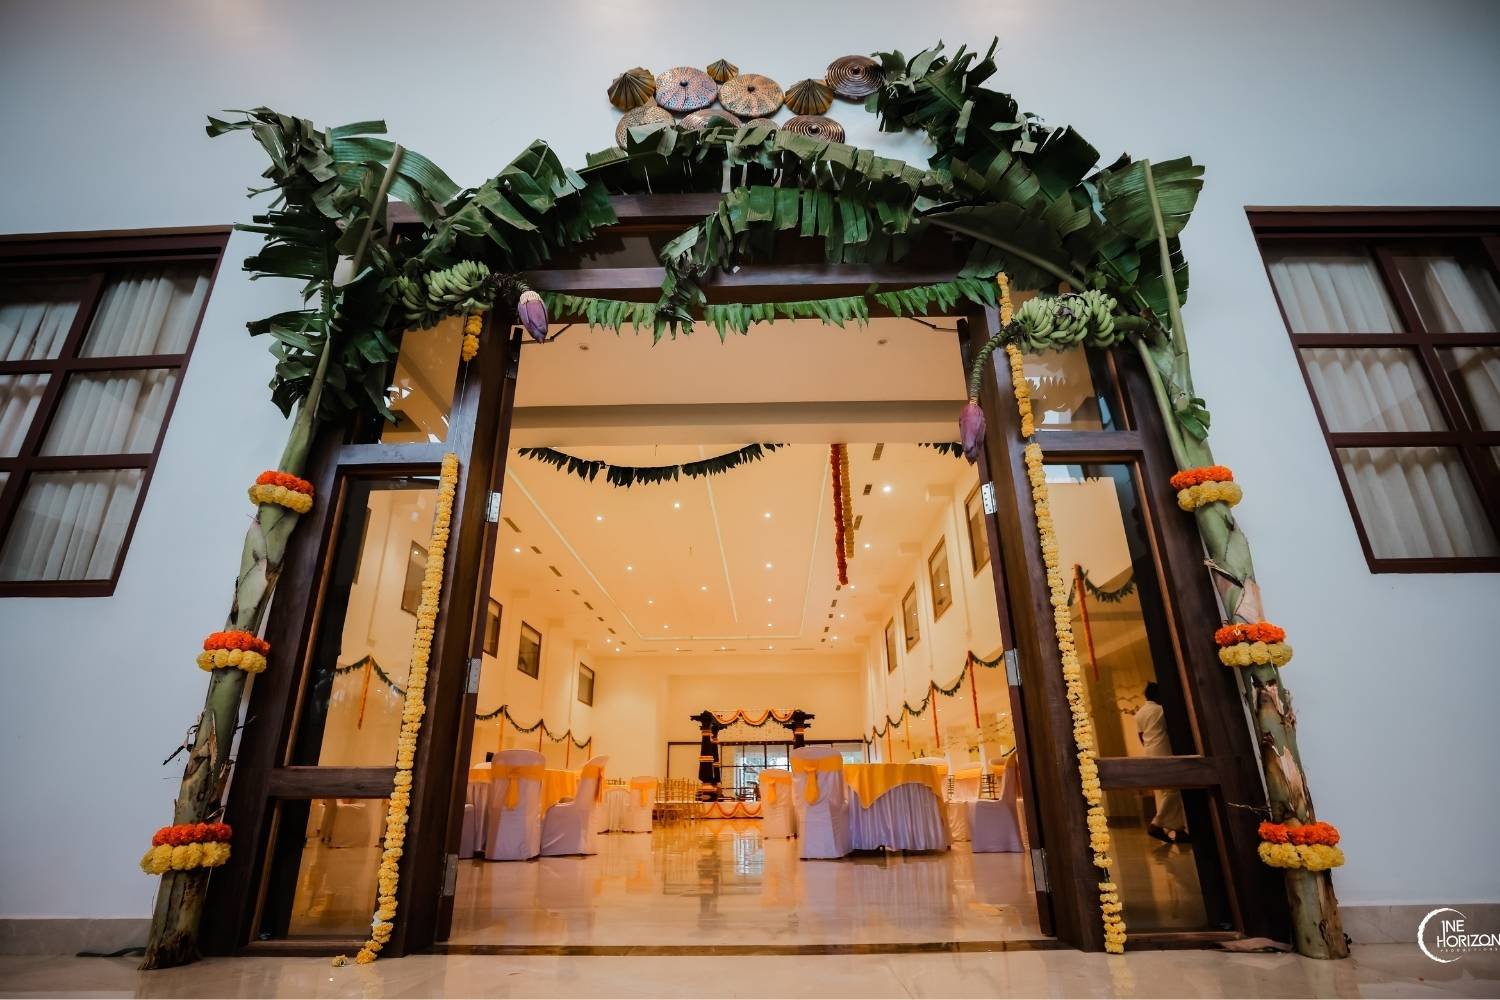 Banquet hall entrance at The Beginning is decorated with mango and banana leaves